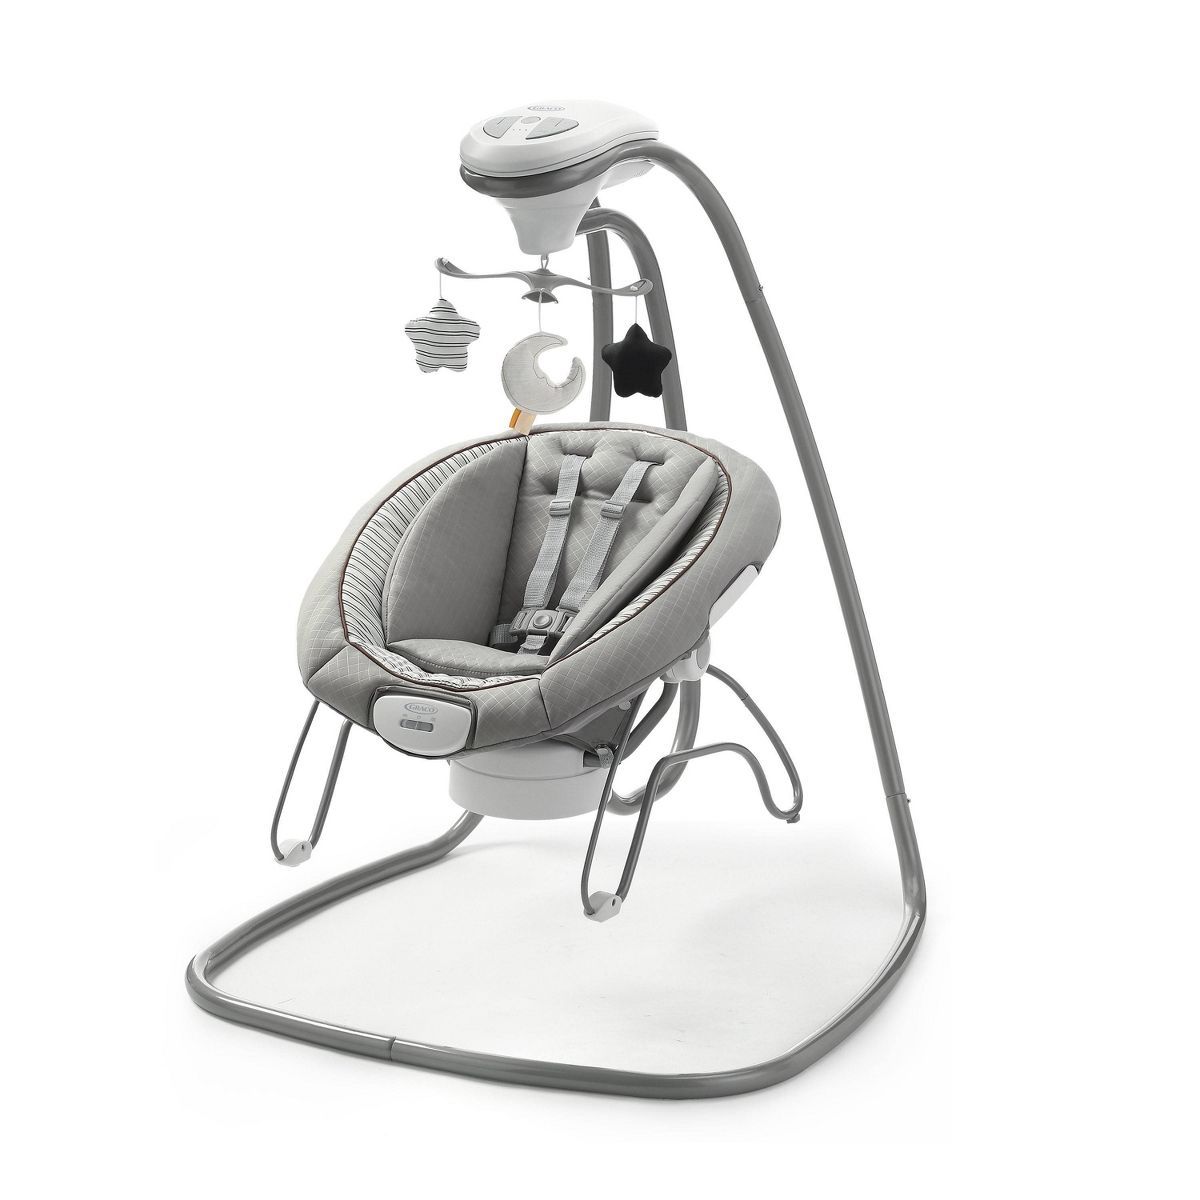 Graco DuetConnect Deluxe Multi-Direction Baby Swing and Bouncer - Britton | Target